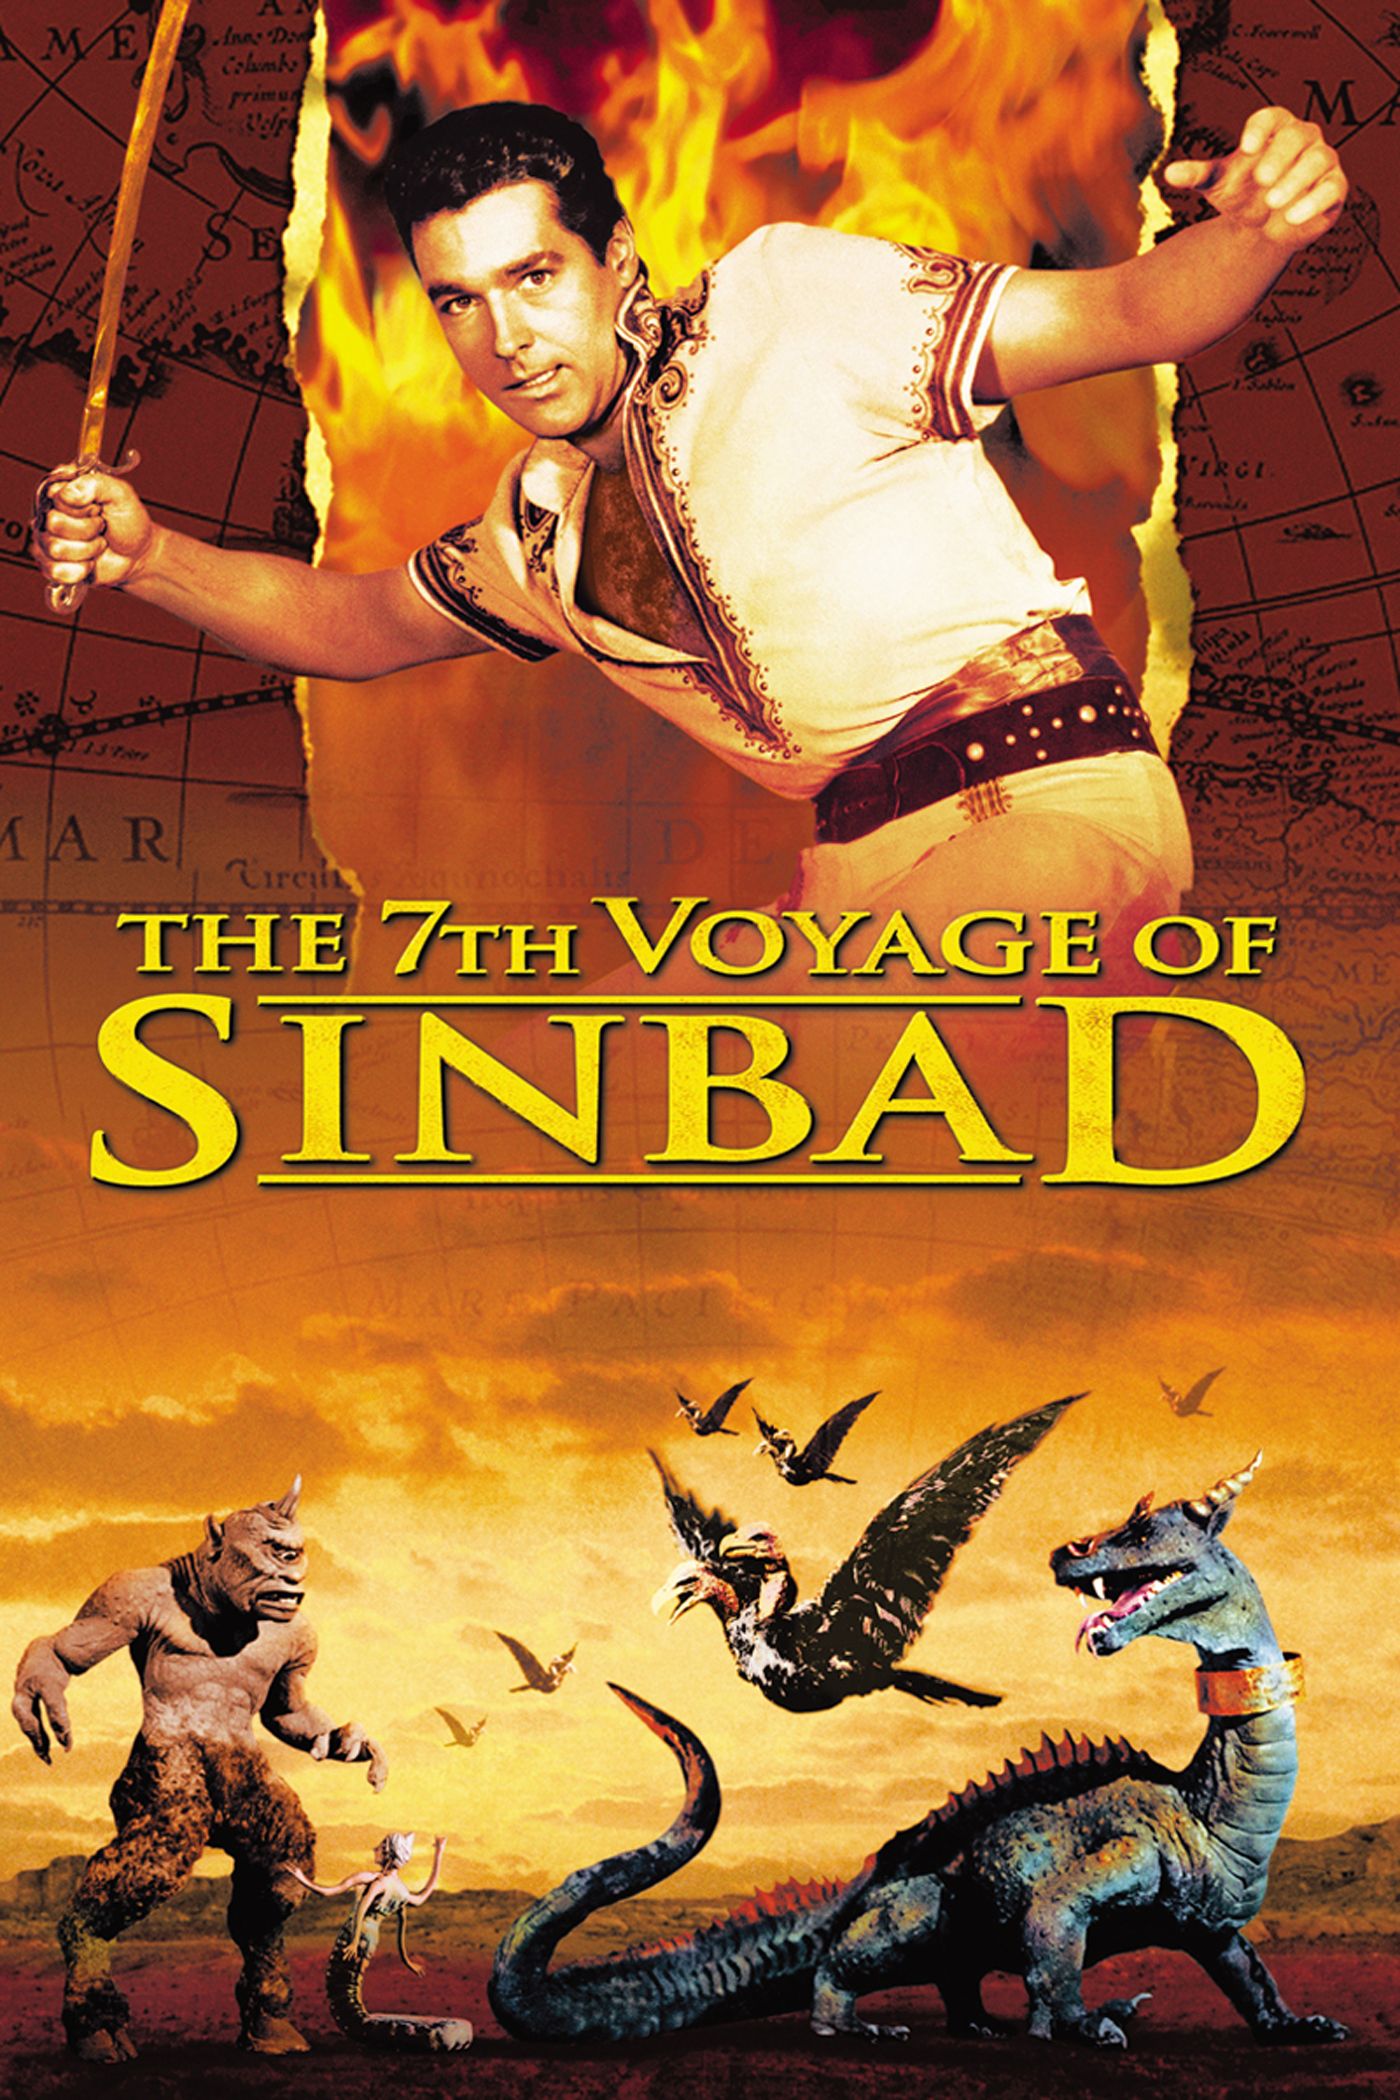 the 7th voyage of sinbad review